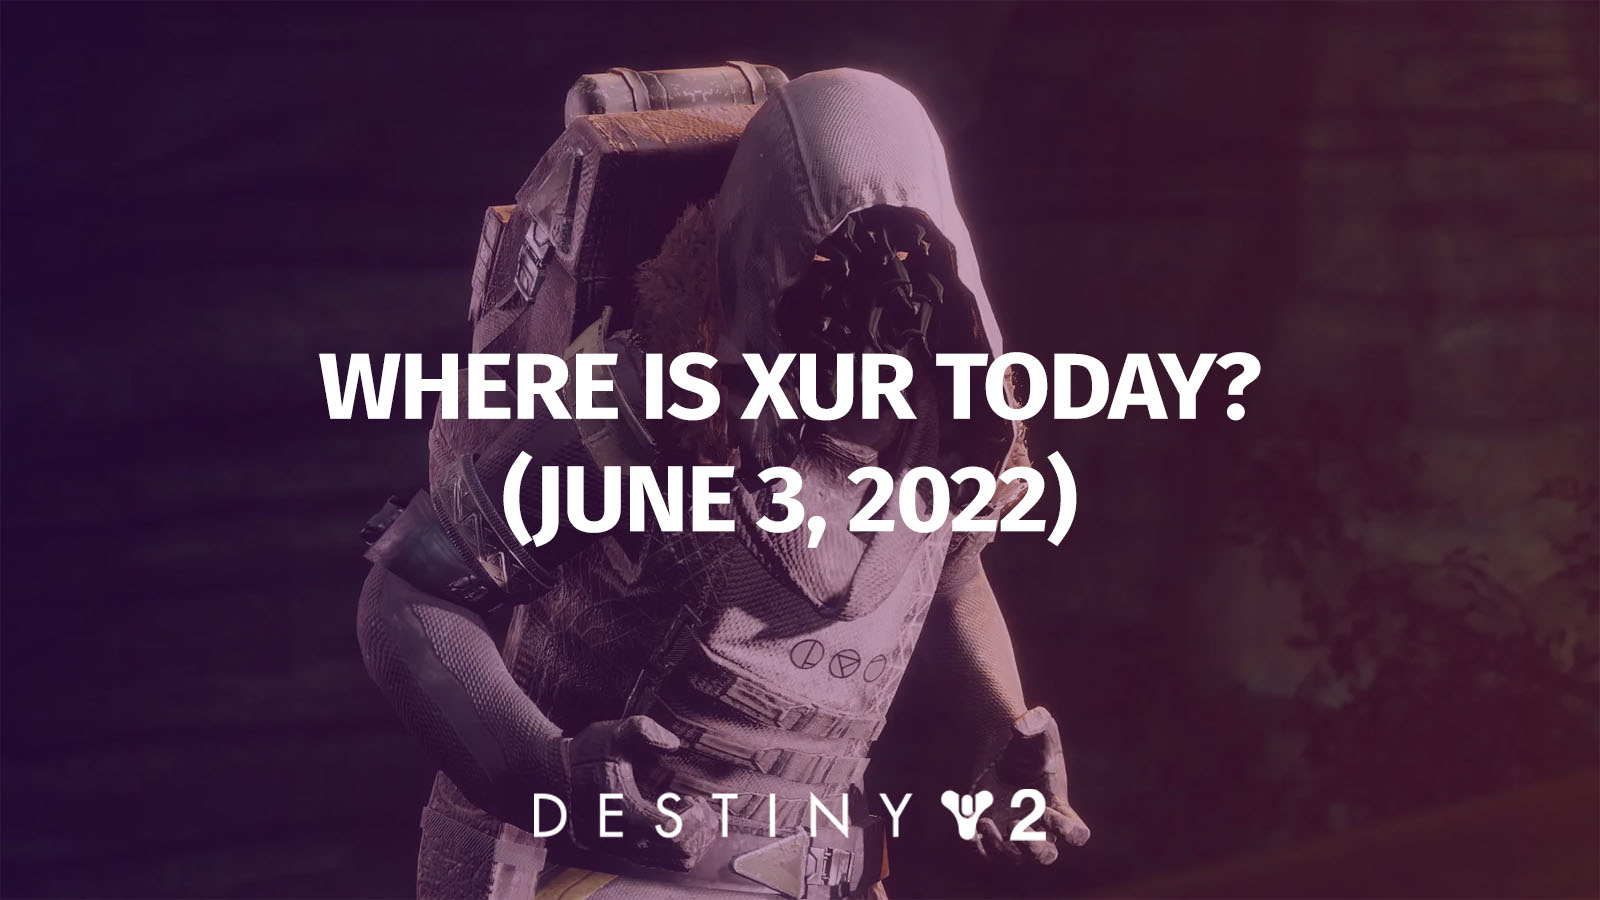 Destiny 2: Where is Xur Today? Exotic Inventory June 3, 2022